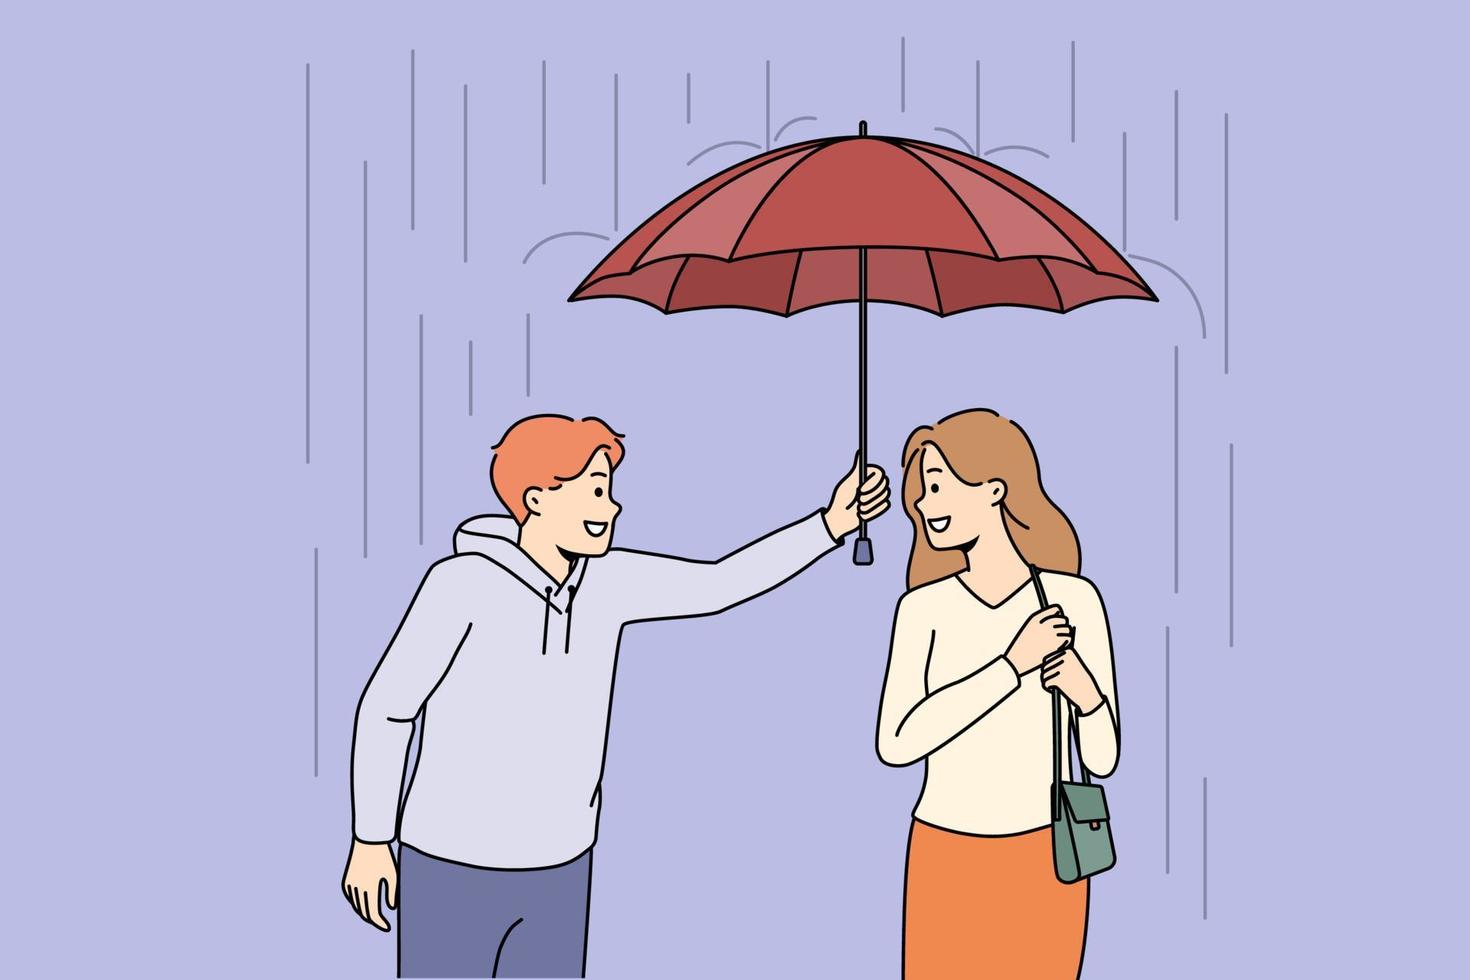 Caring young man sharing umbrella with pretty woman outdoors. Smiling male gentlemen protect female from rain outside. Vector illustration.